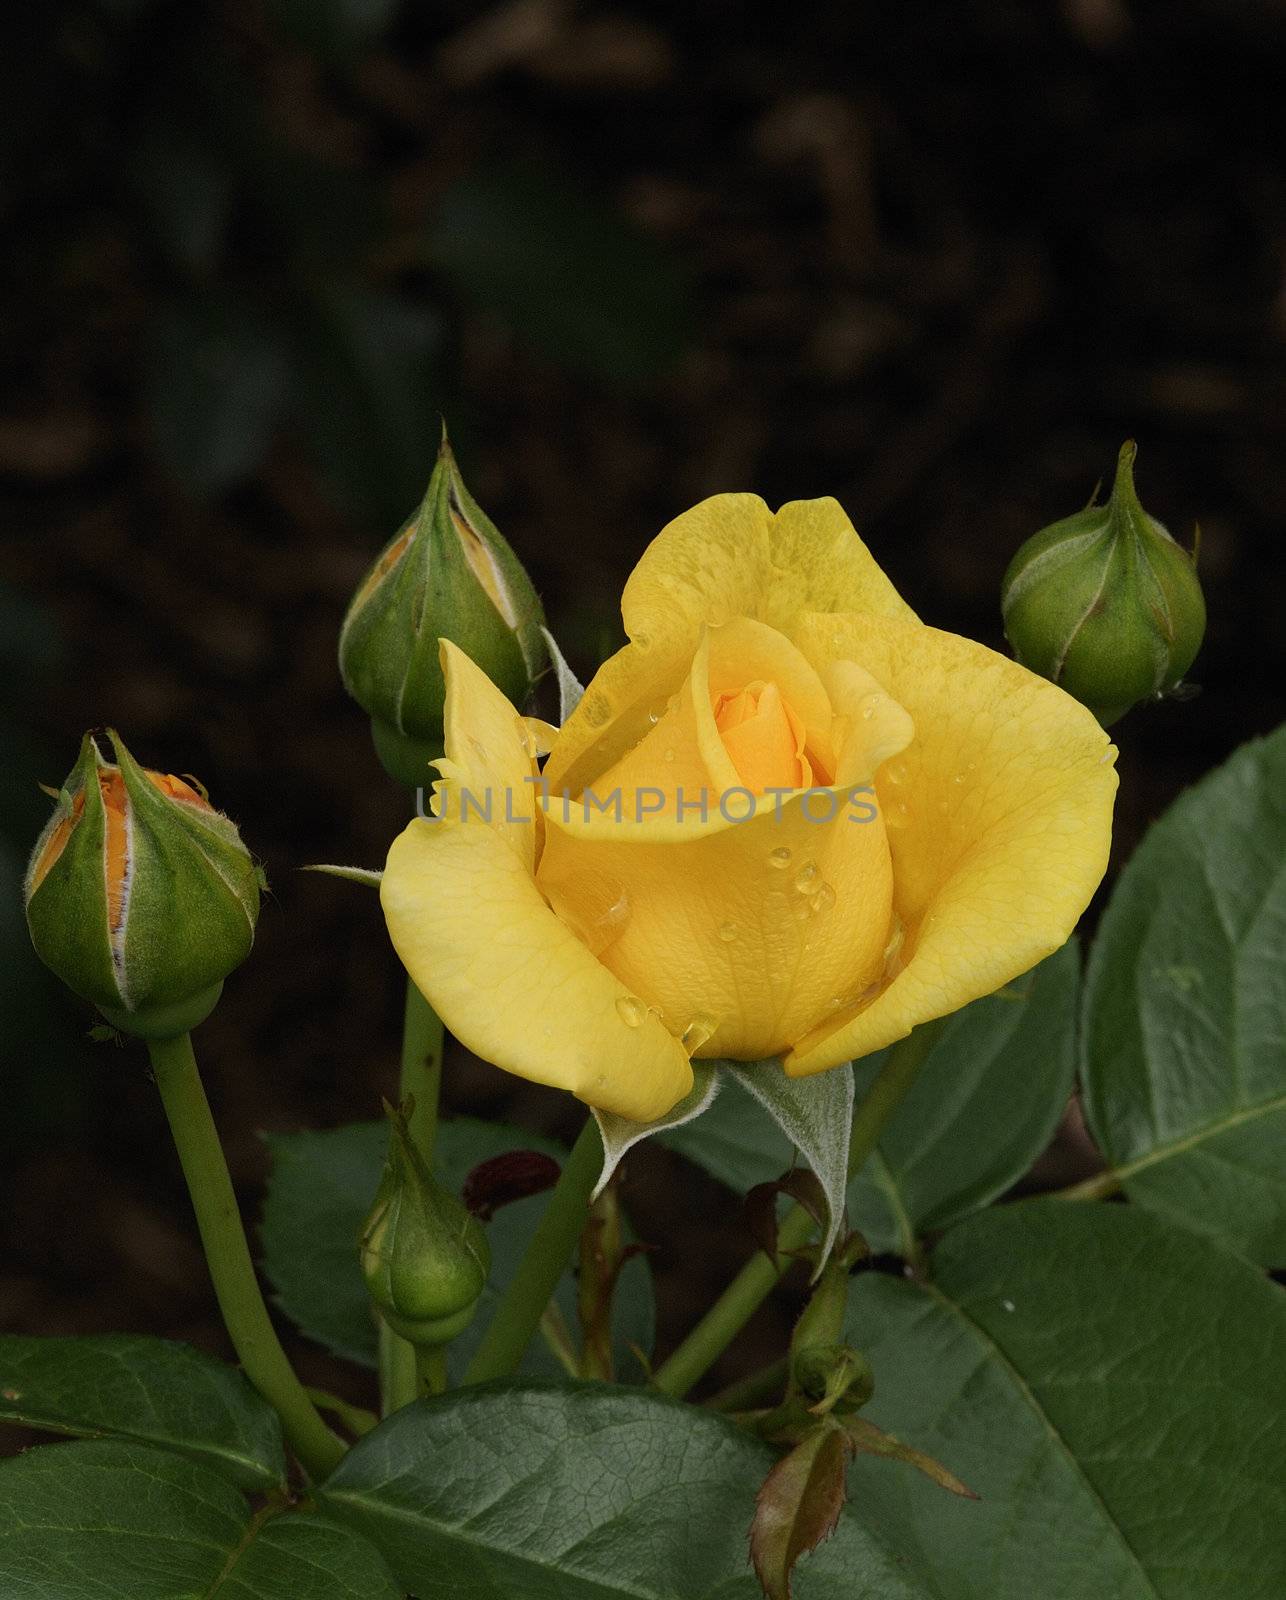 A beautiful yellow rose captured after a slight downpour